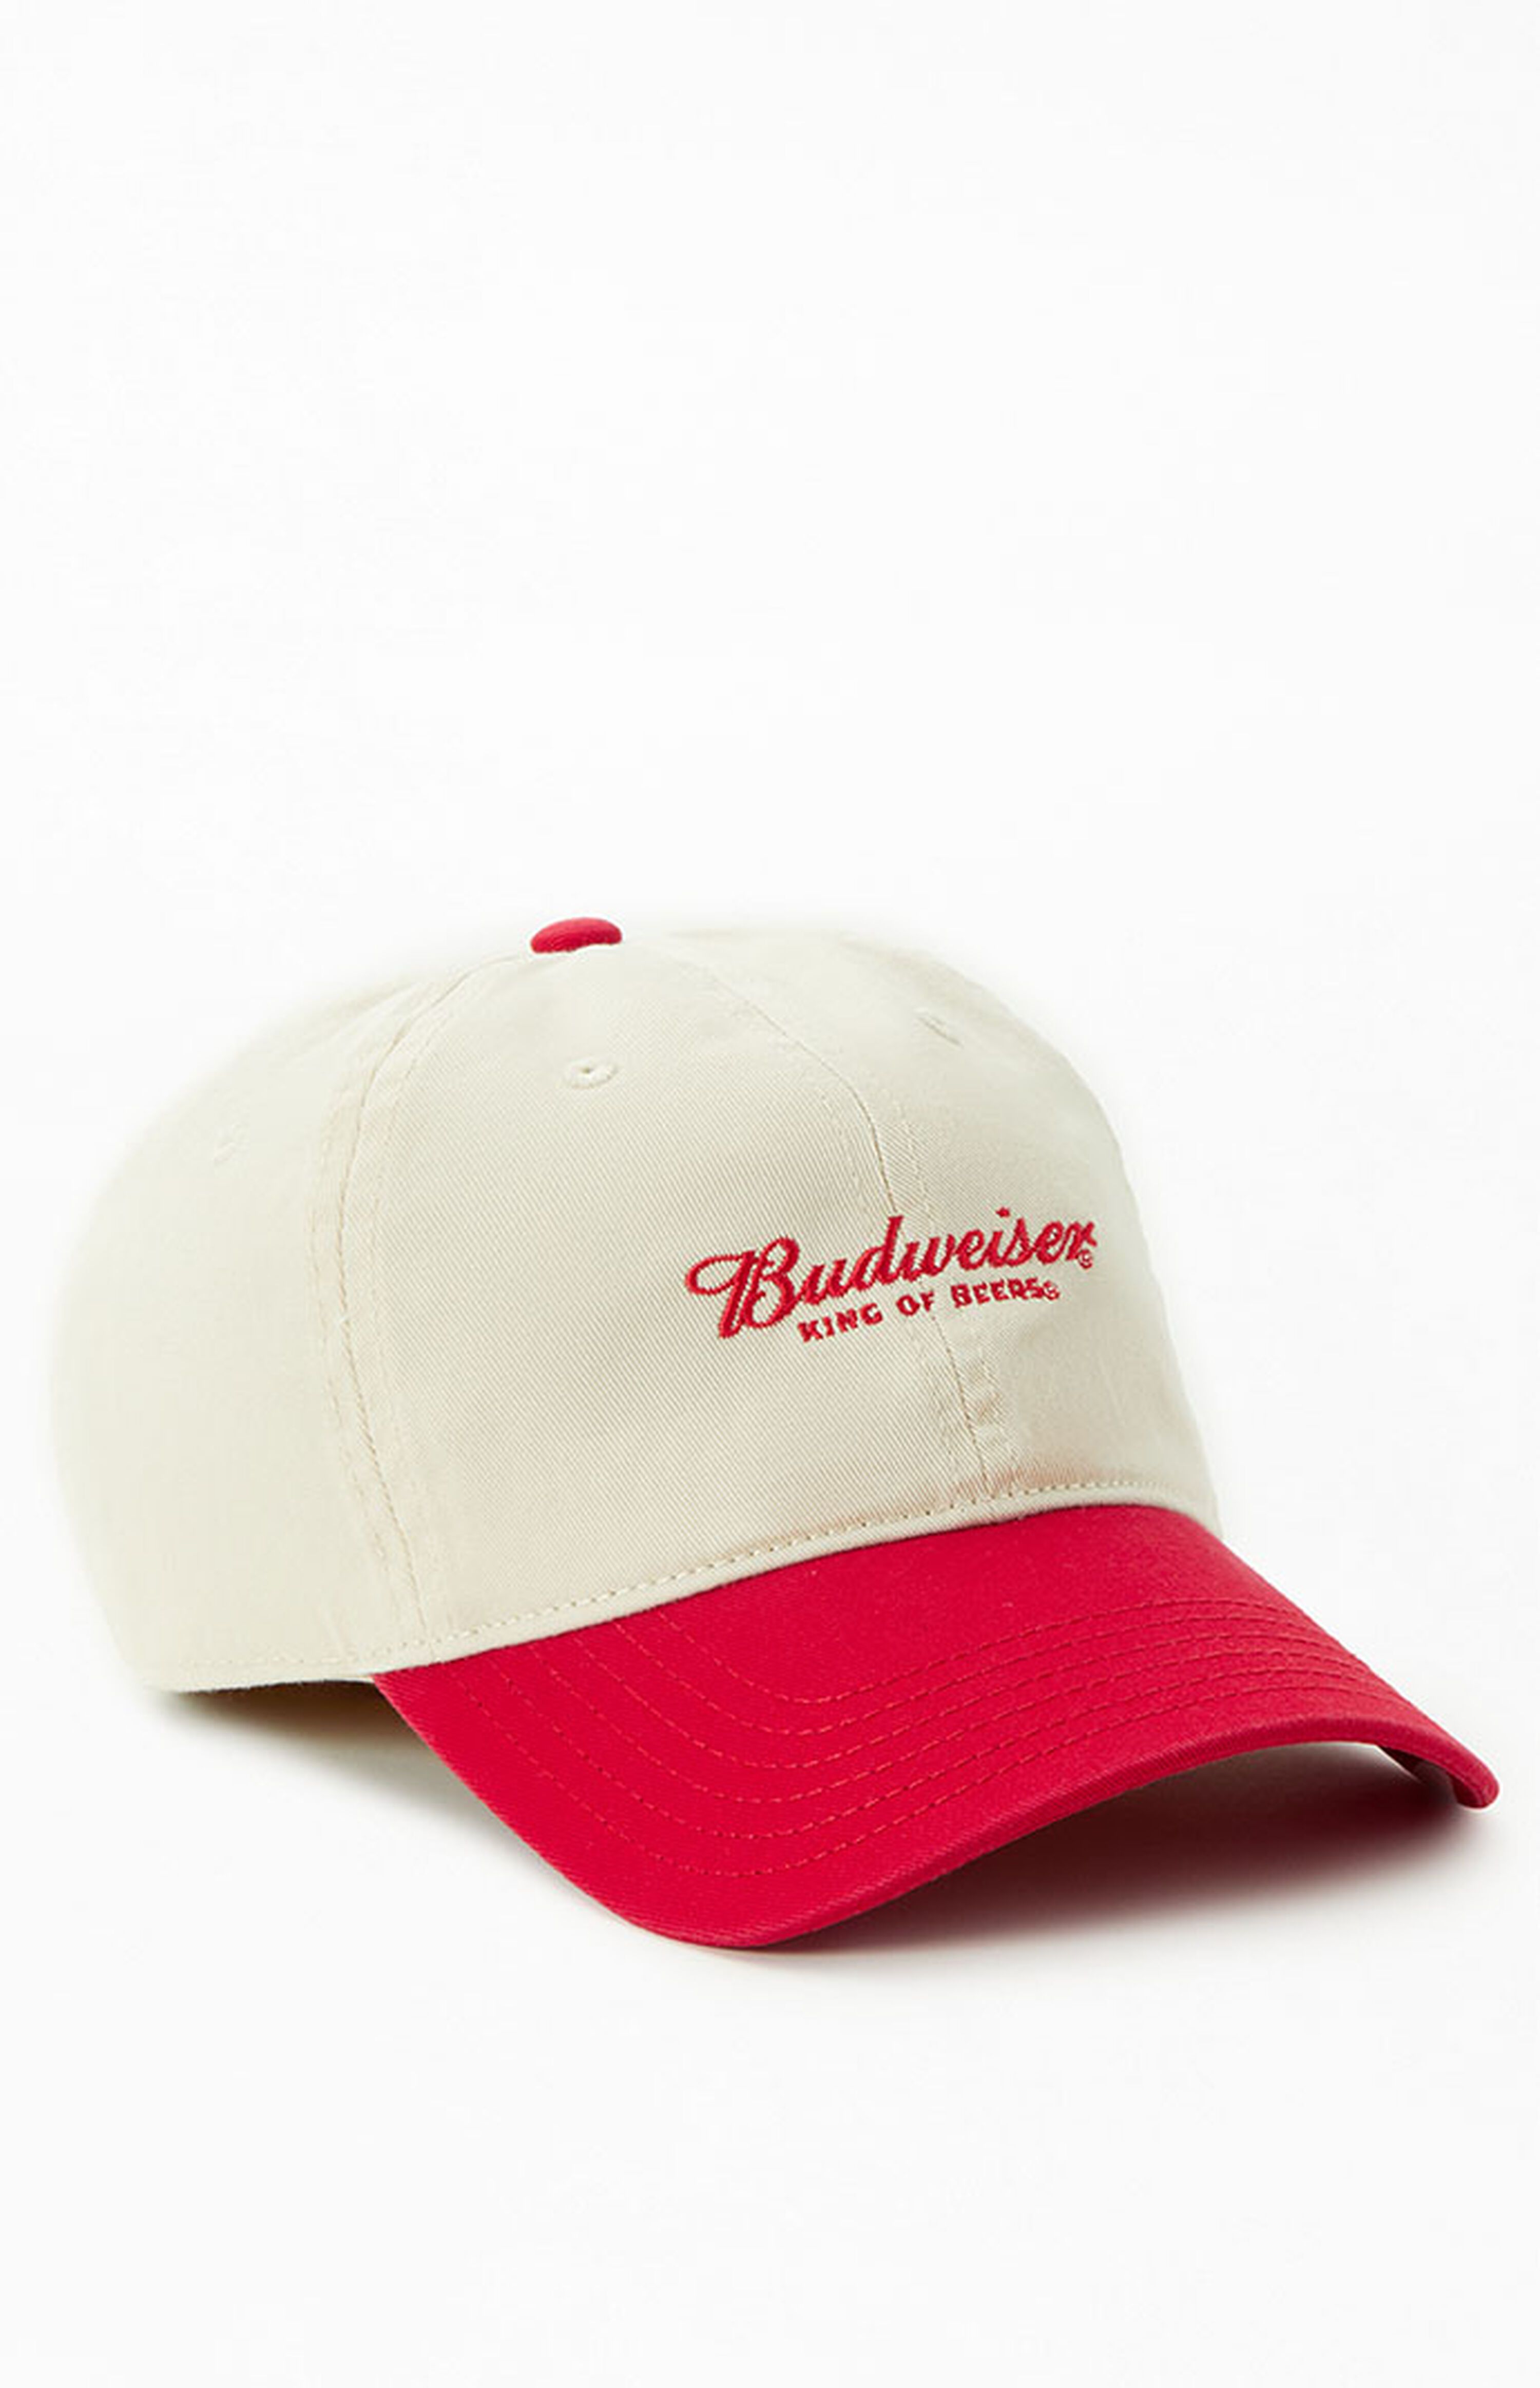 Budweiser King of Beers Strapback Dad Hat | PacSun